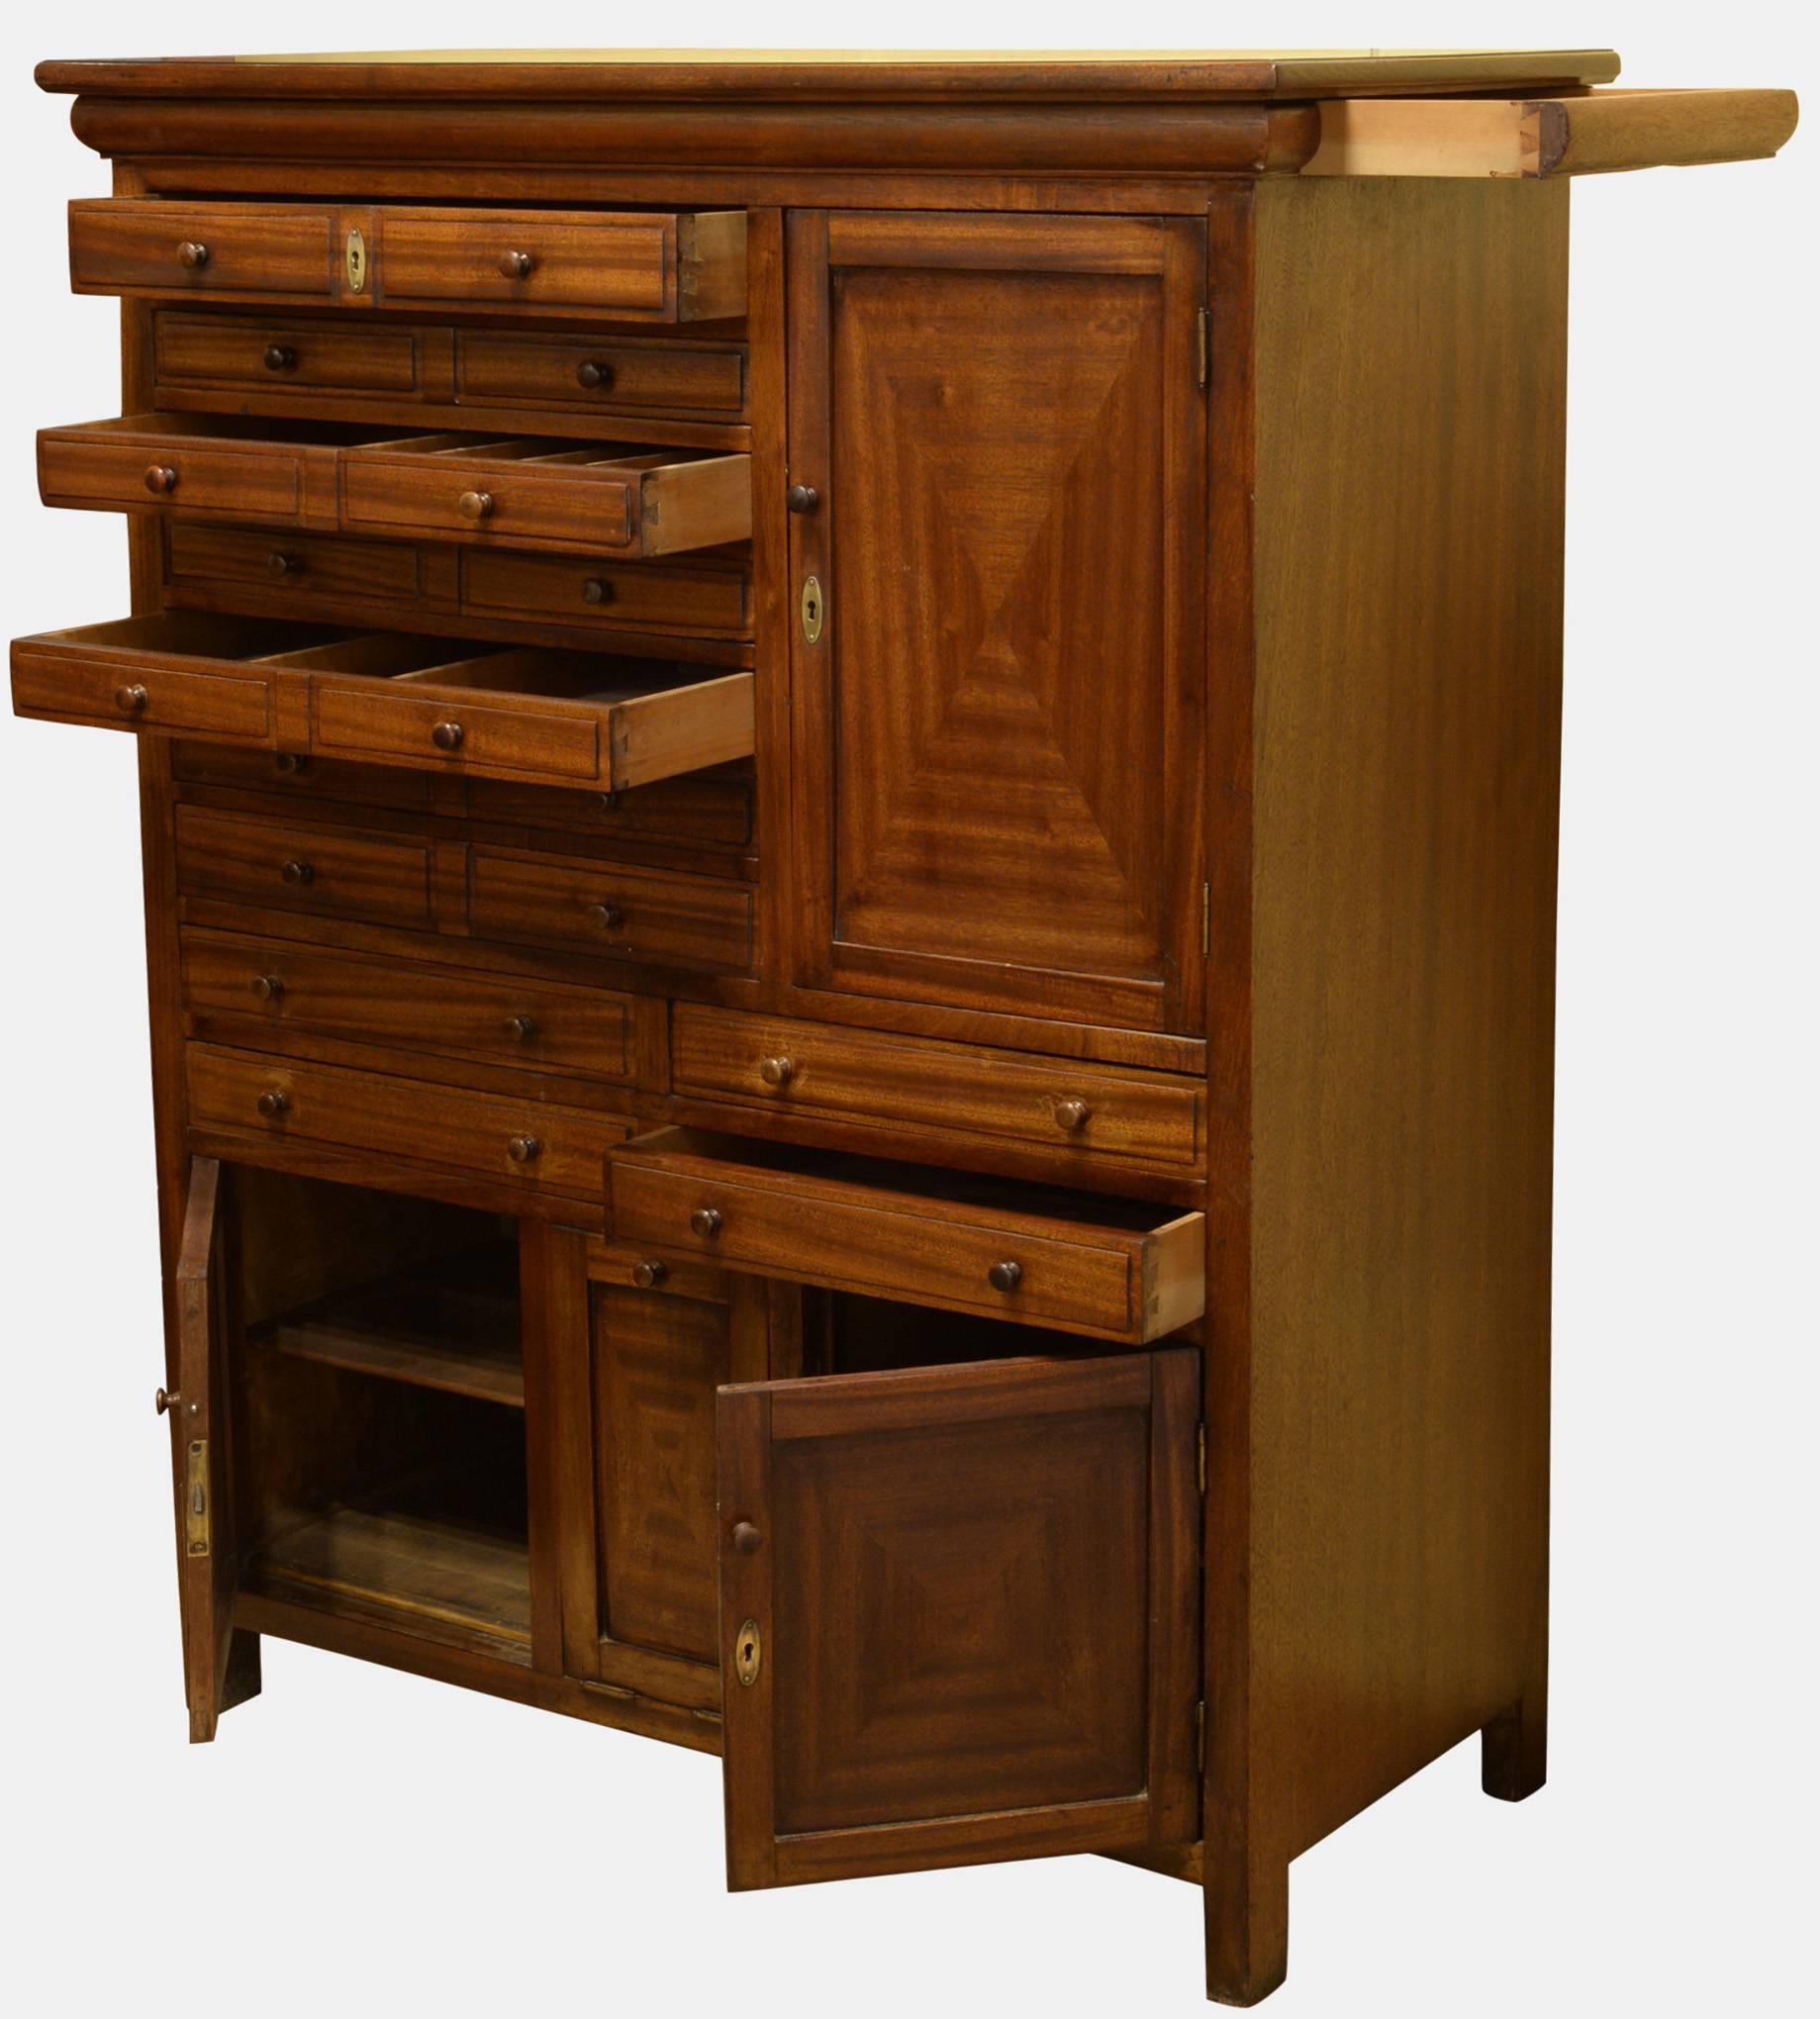 Mahogany dental cabinet with two secret drawers under top on each side,

circa 1920.